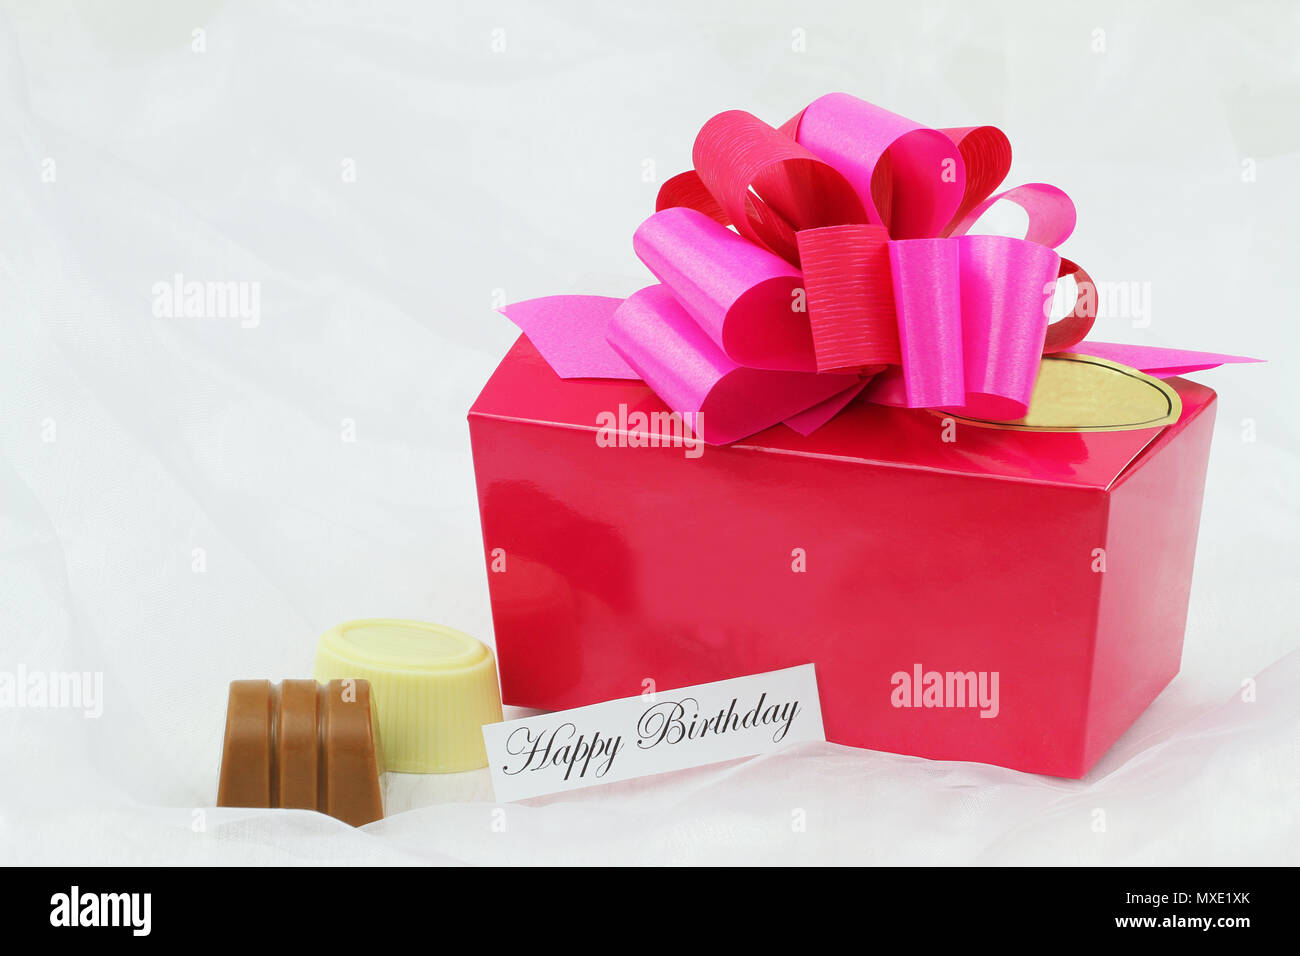 Happy Birthday card with pink box of chocolates on white textile Stock Photo